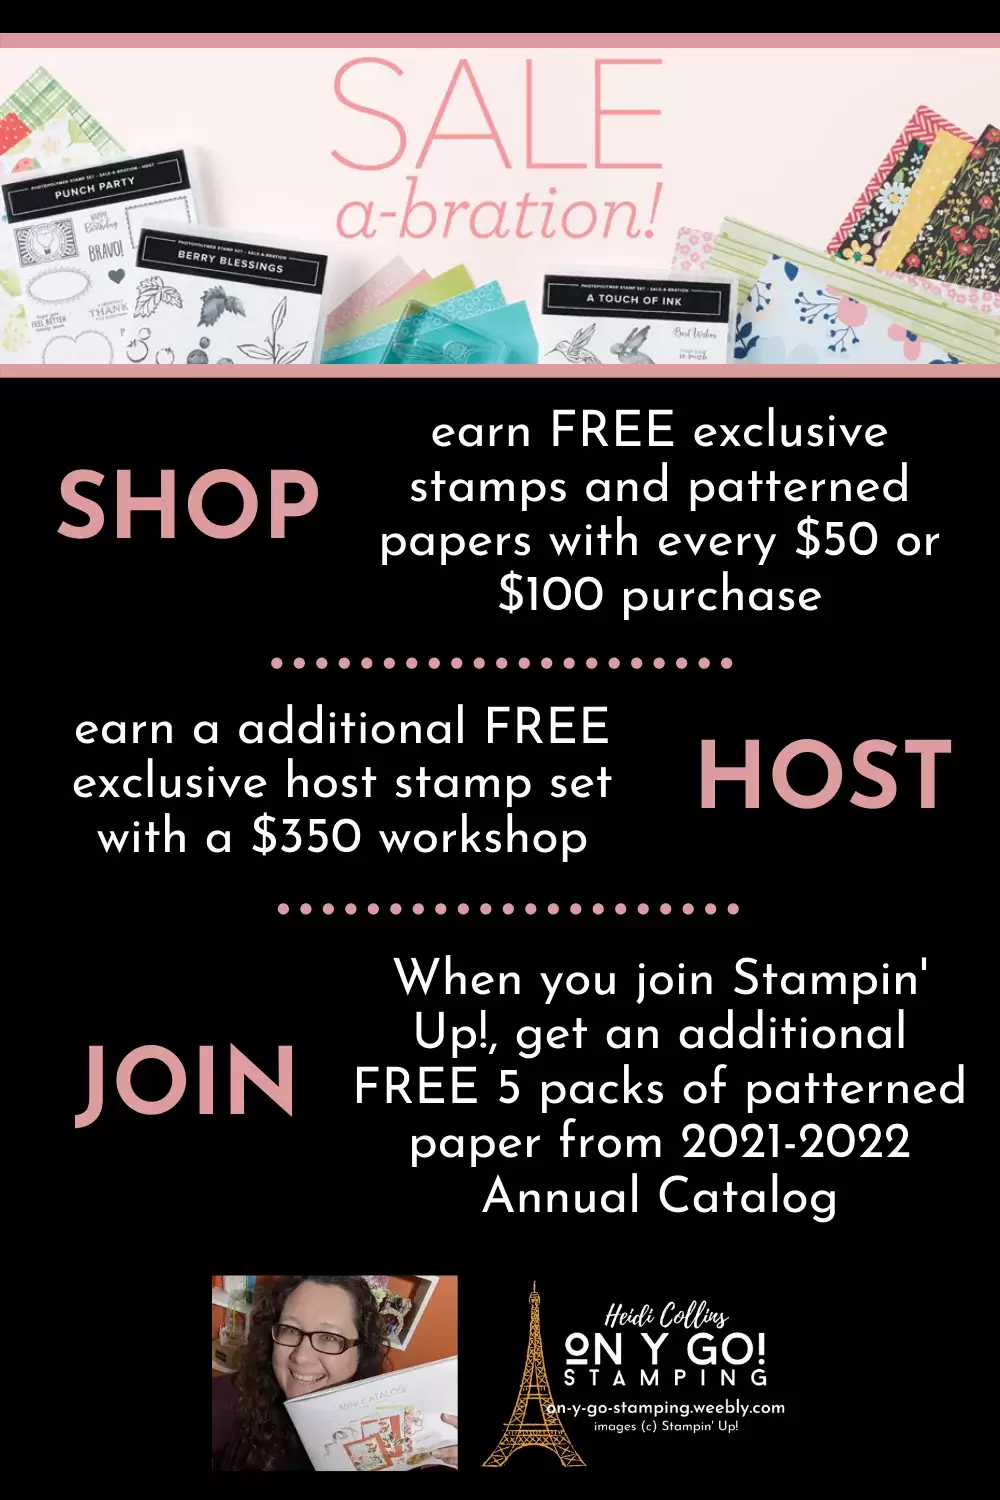 What is Sale-A-Bration? Earn free stamps and papers during January and February from Stampin' Up! when you shop, host, or join!